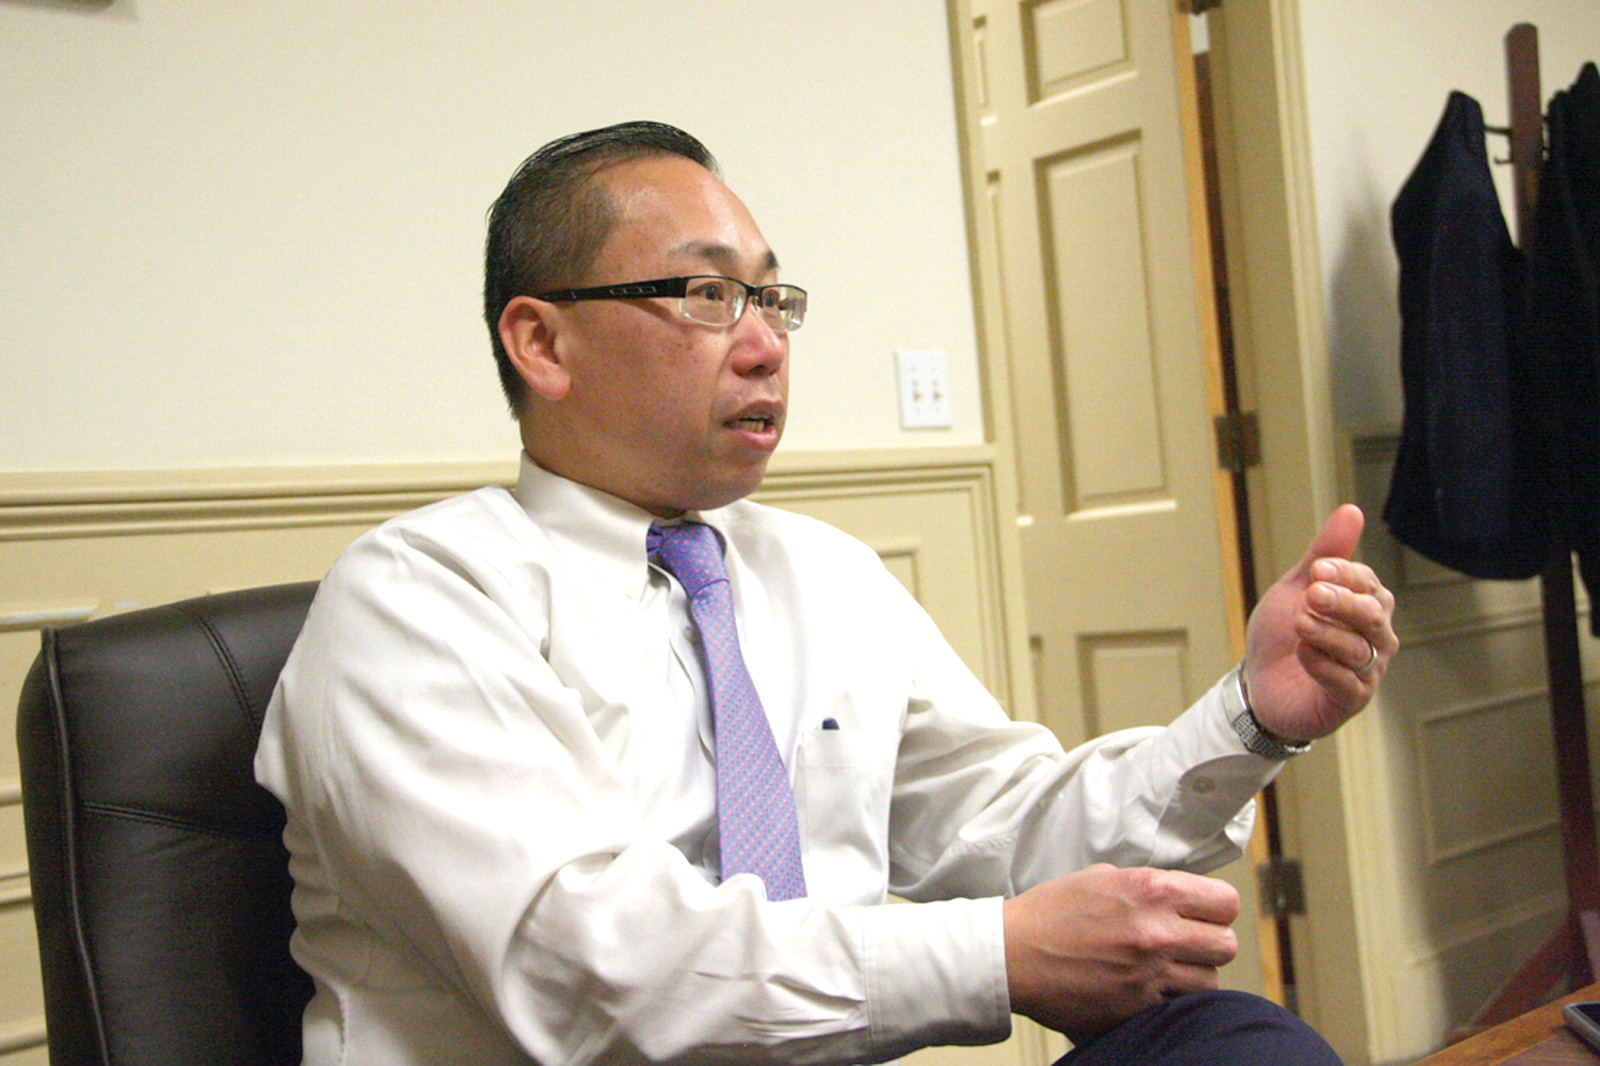 WHAT’S TO COME: Cranston Mayor Allan Fung, who is entering his fourth and final term, discussed the city’s future and his legacy in a 90-minute conversation with the Herald on Thursday.